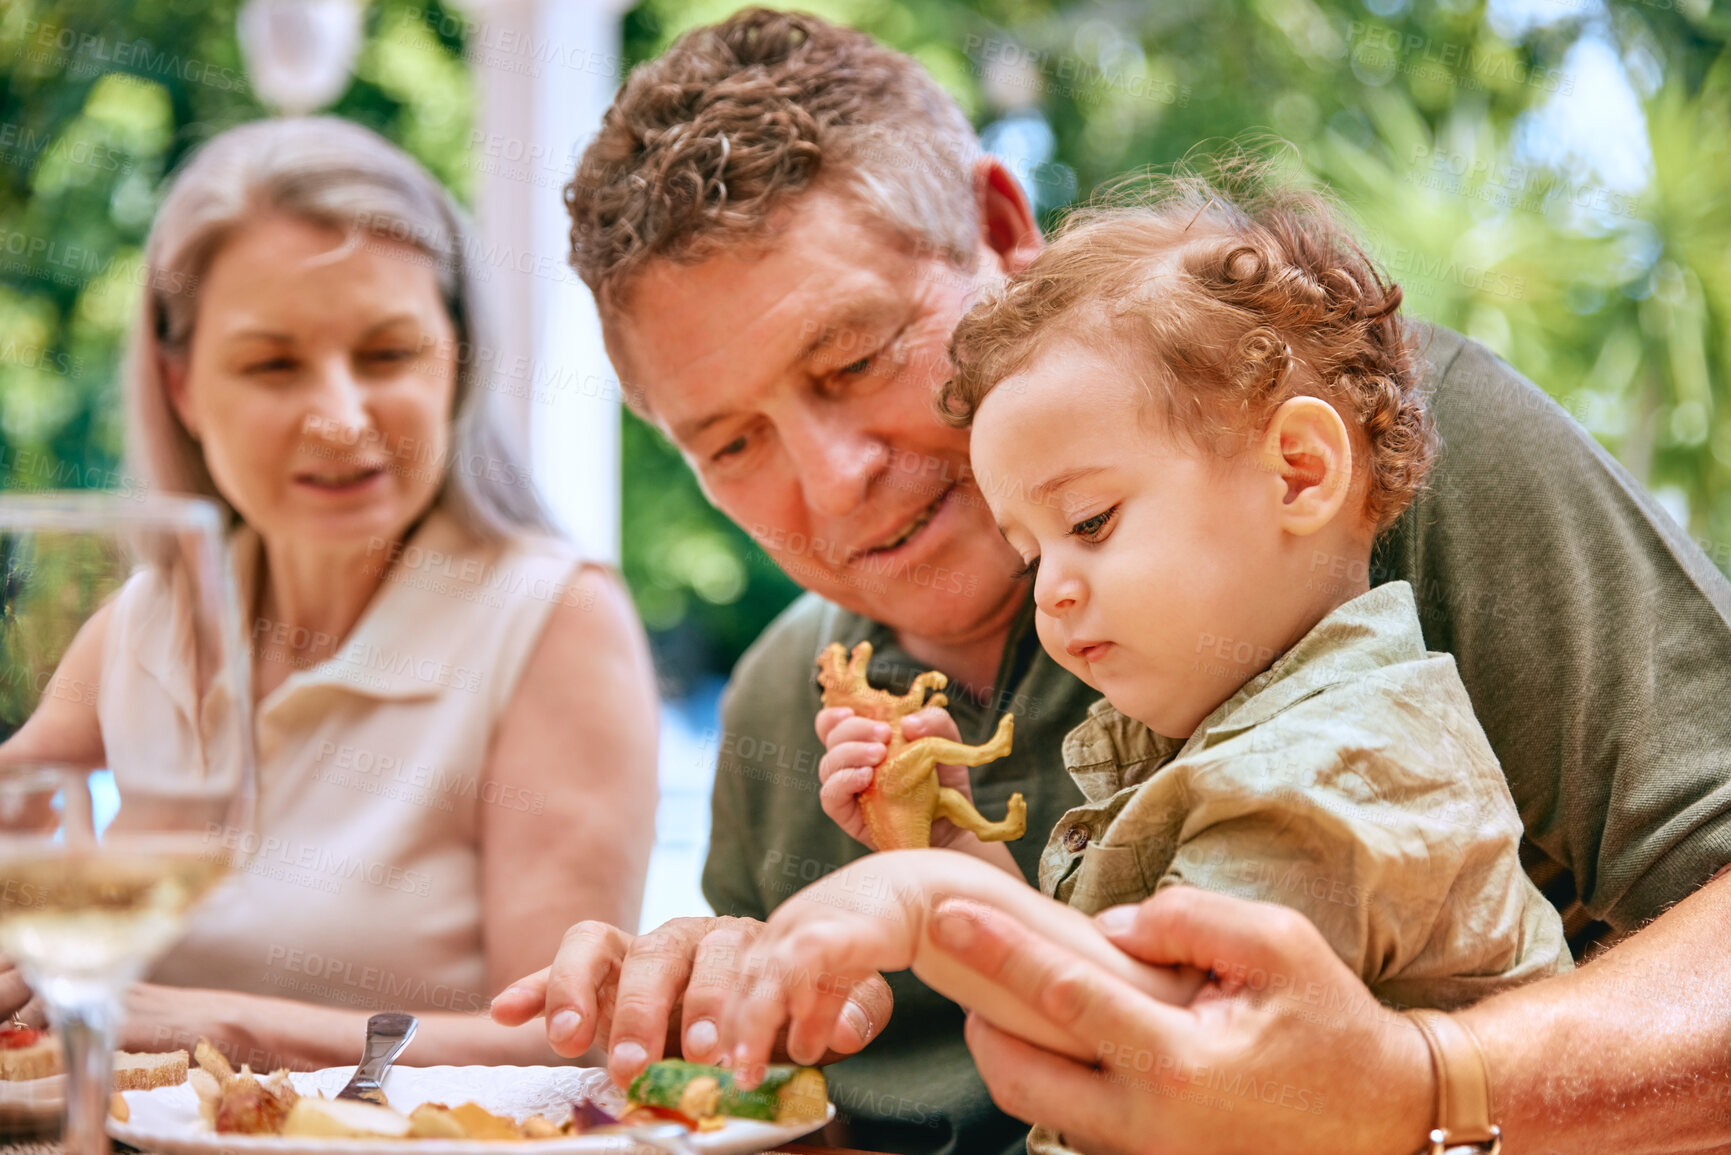 Buy stock photo Food, grandpa and baby on lap eating vegetables for healthy, diet and nutrition in family home. Help, health and elderly grandparents teaching child grip for child development and wellness.

